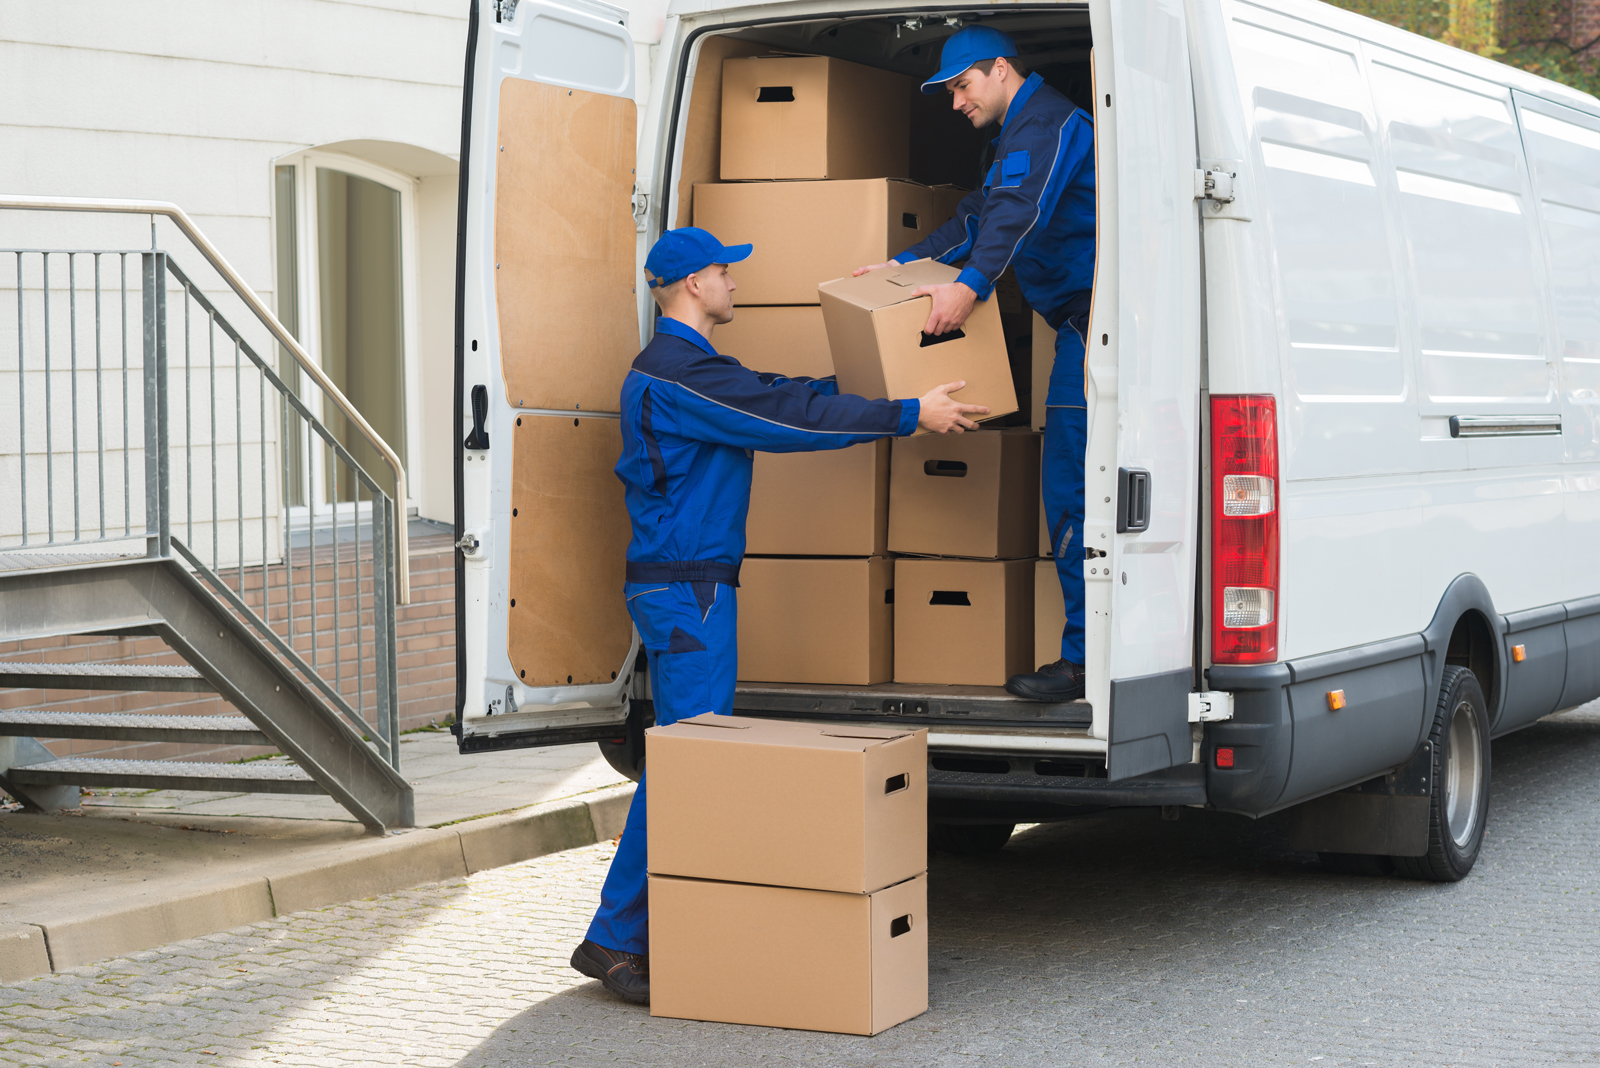 A courier van driver unloading some packages